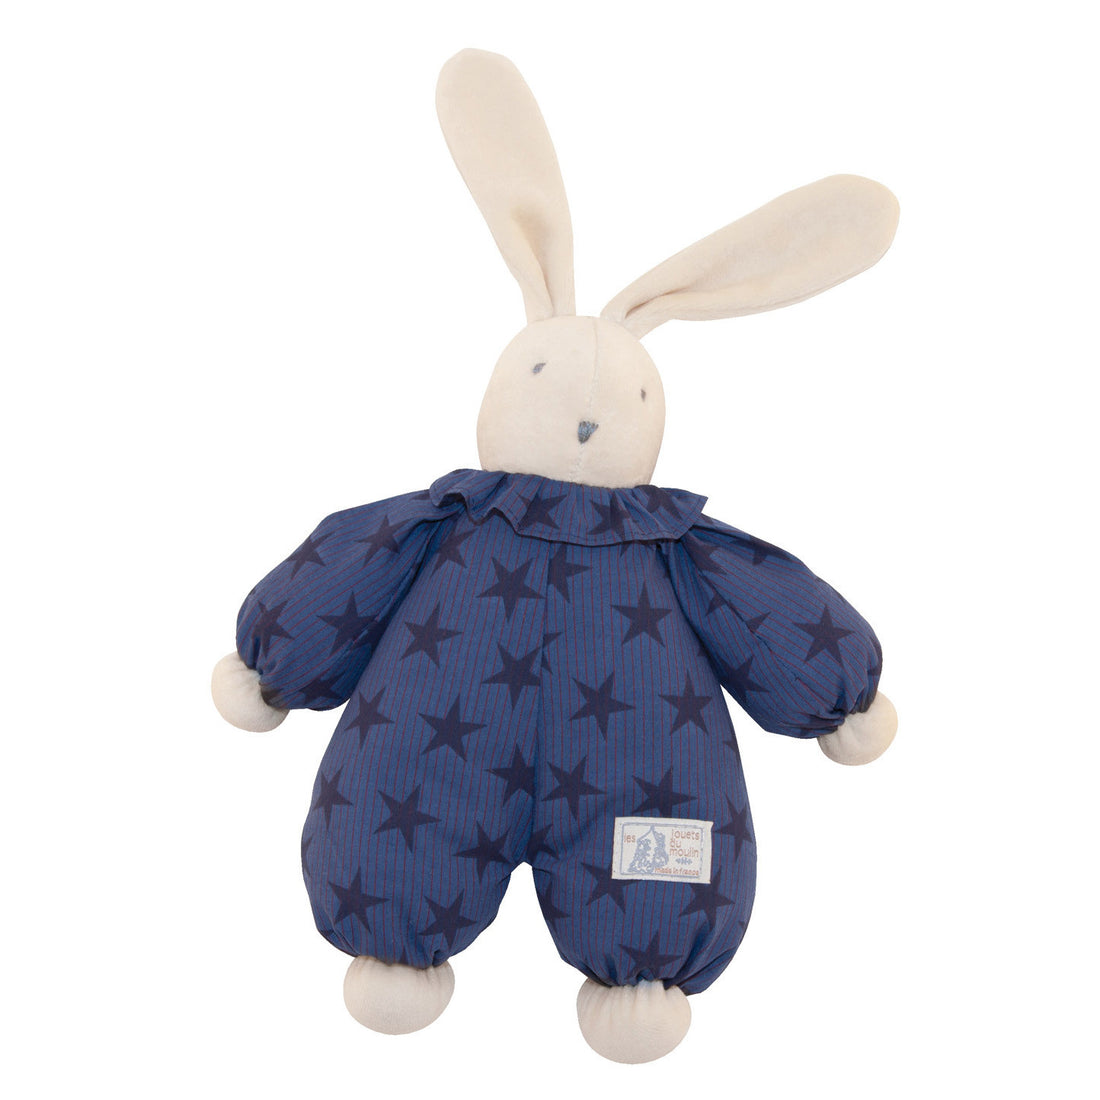 moulin-roty-rabbit-doll-blue-with-star-01